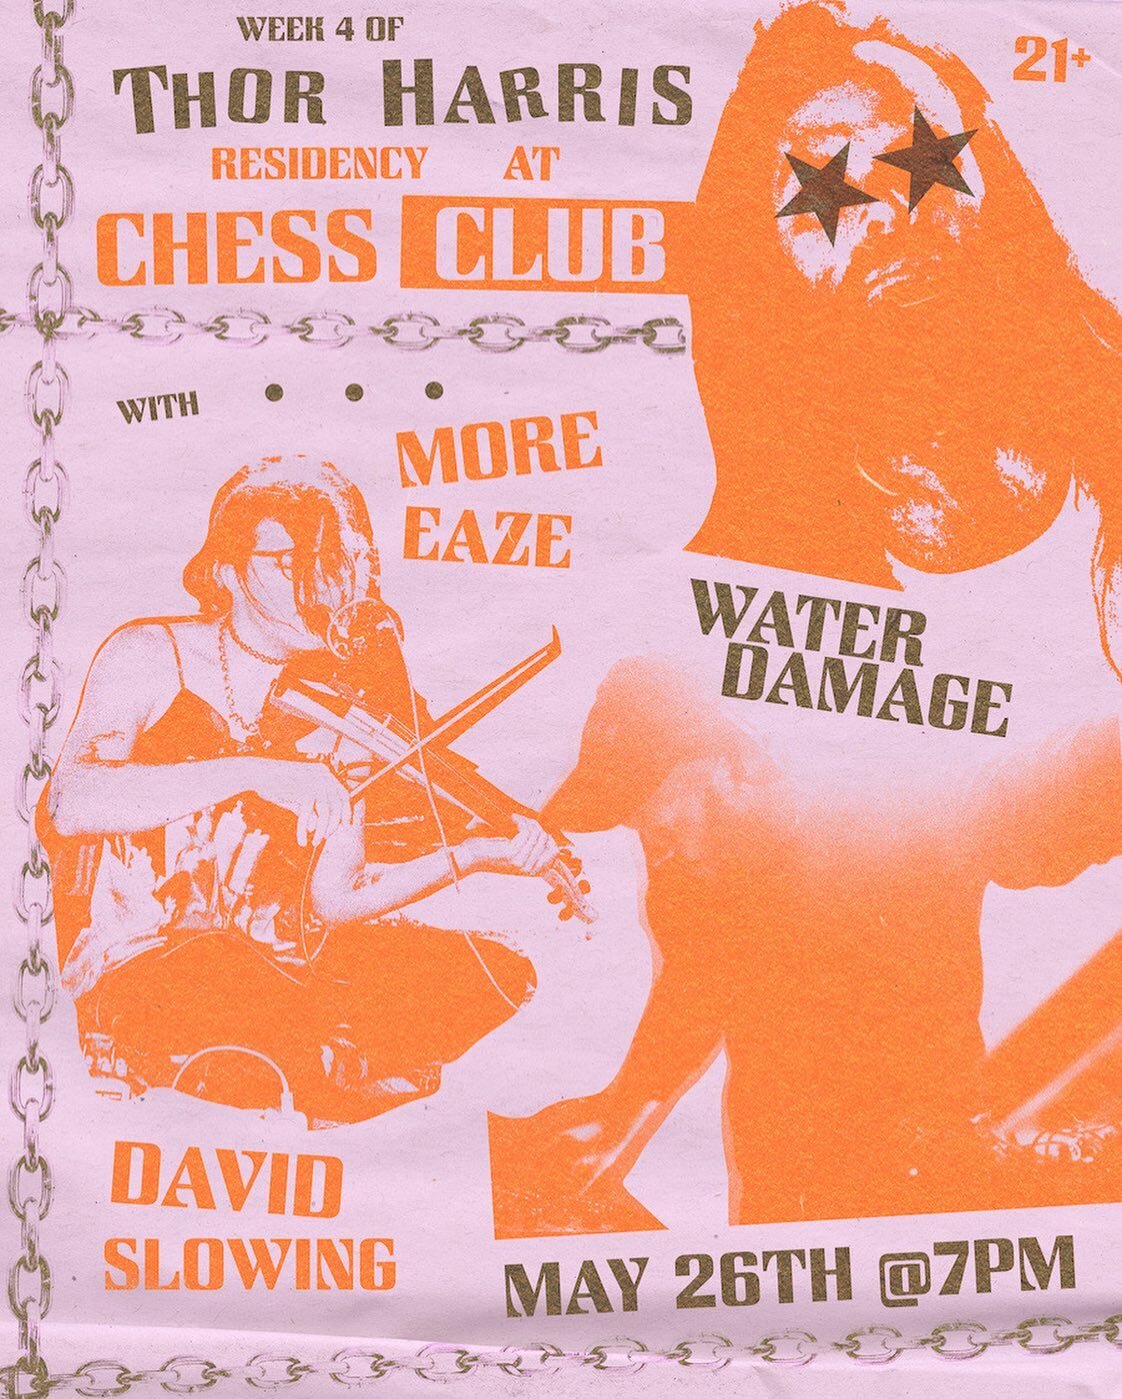 Super pumped to be joining @wwwaterdamage and @thorharris for his May residency at @chessclubaustin along with @more_eaze.